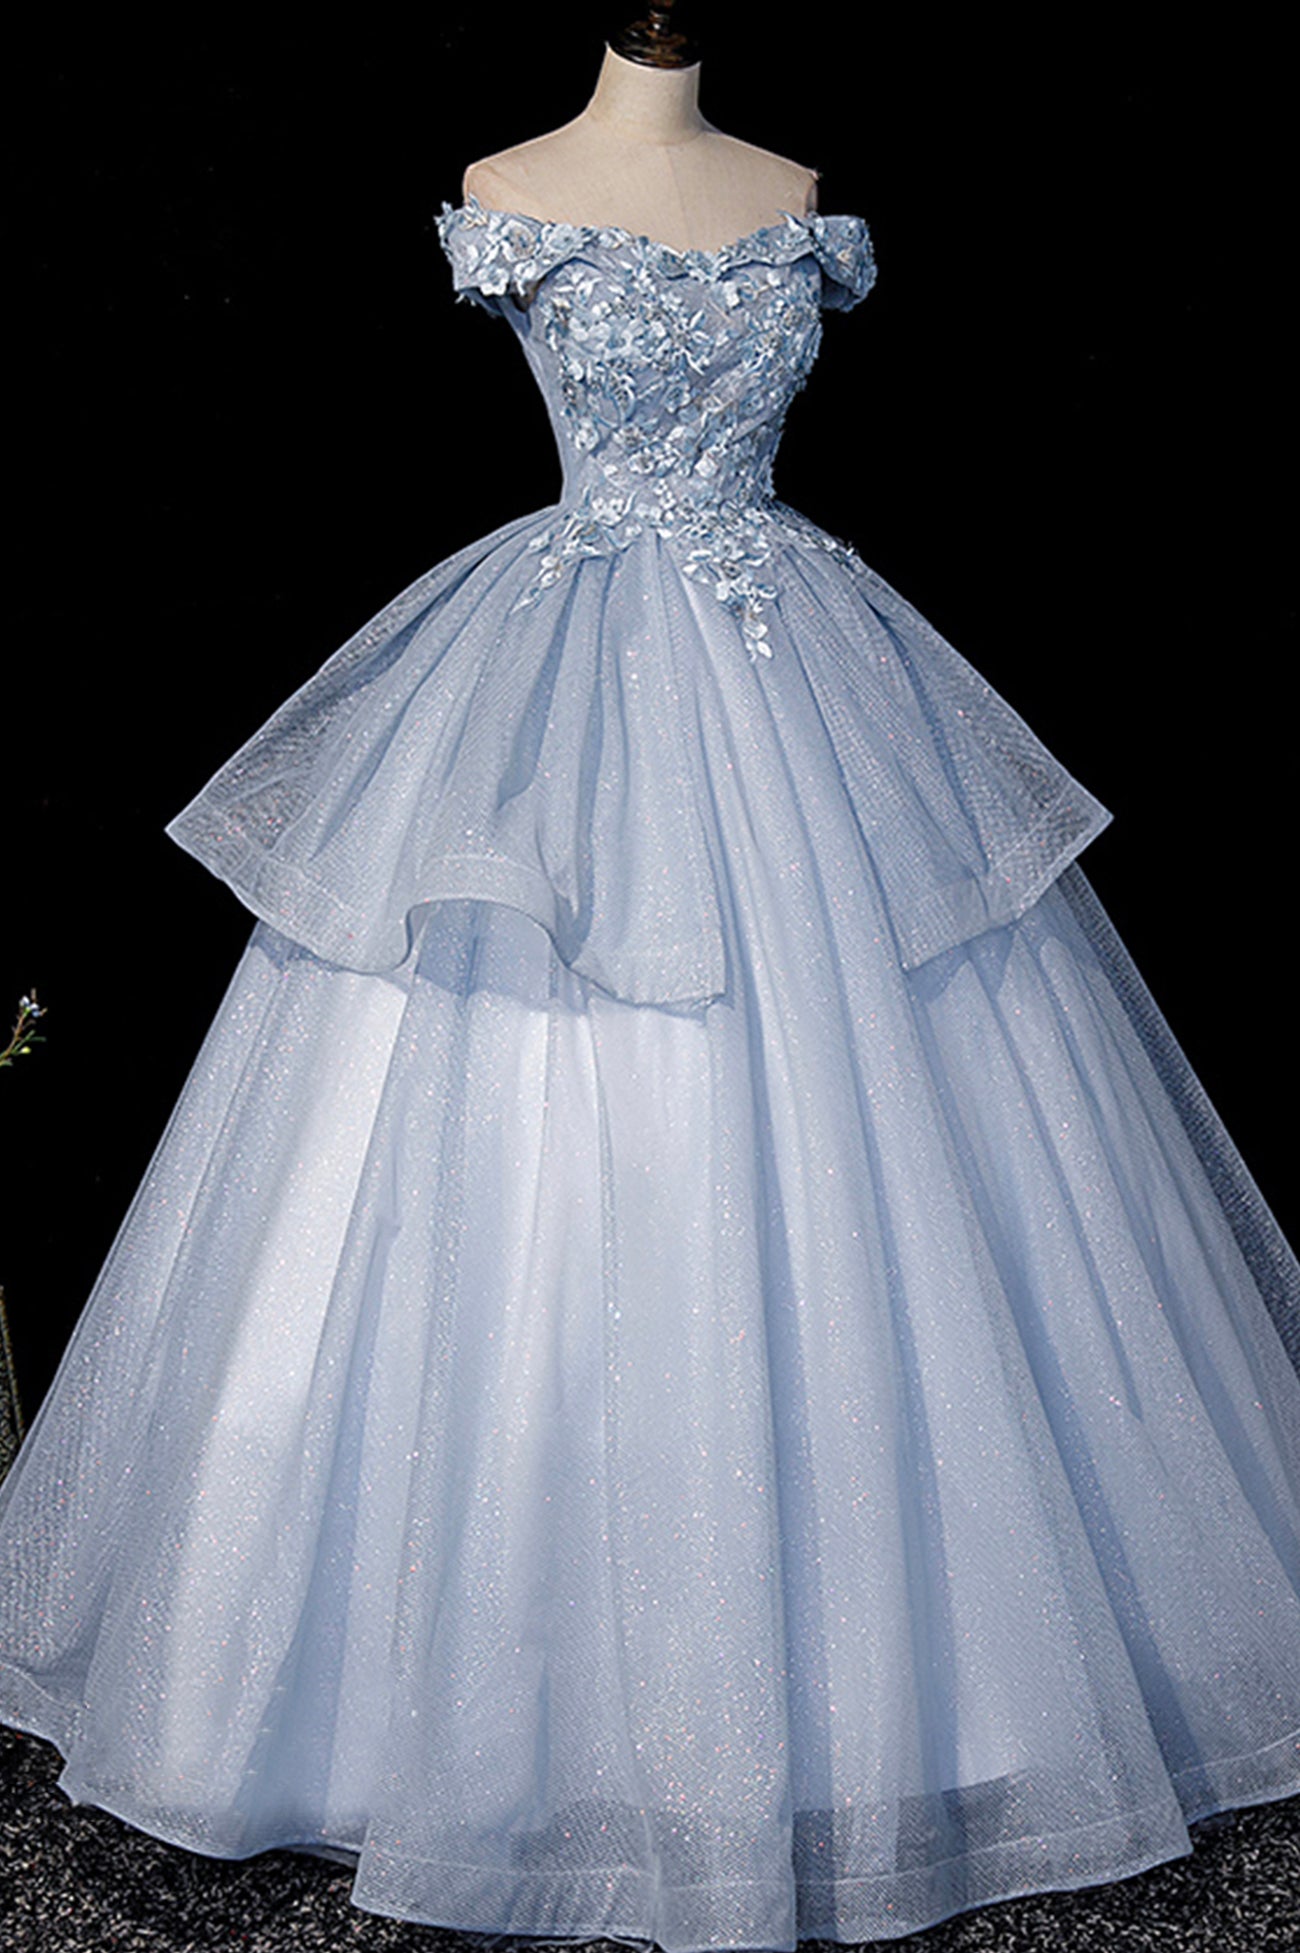 Beautiful Ball Gown Blue Tulle Lace Long Party Dress, Off the Shoulder Evening Dress